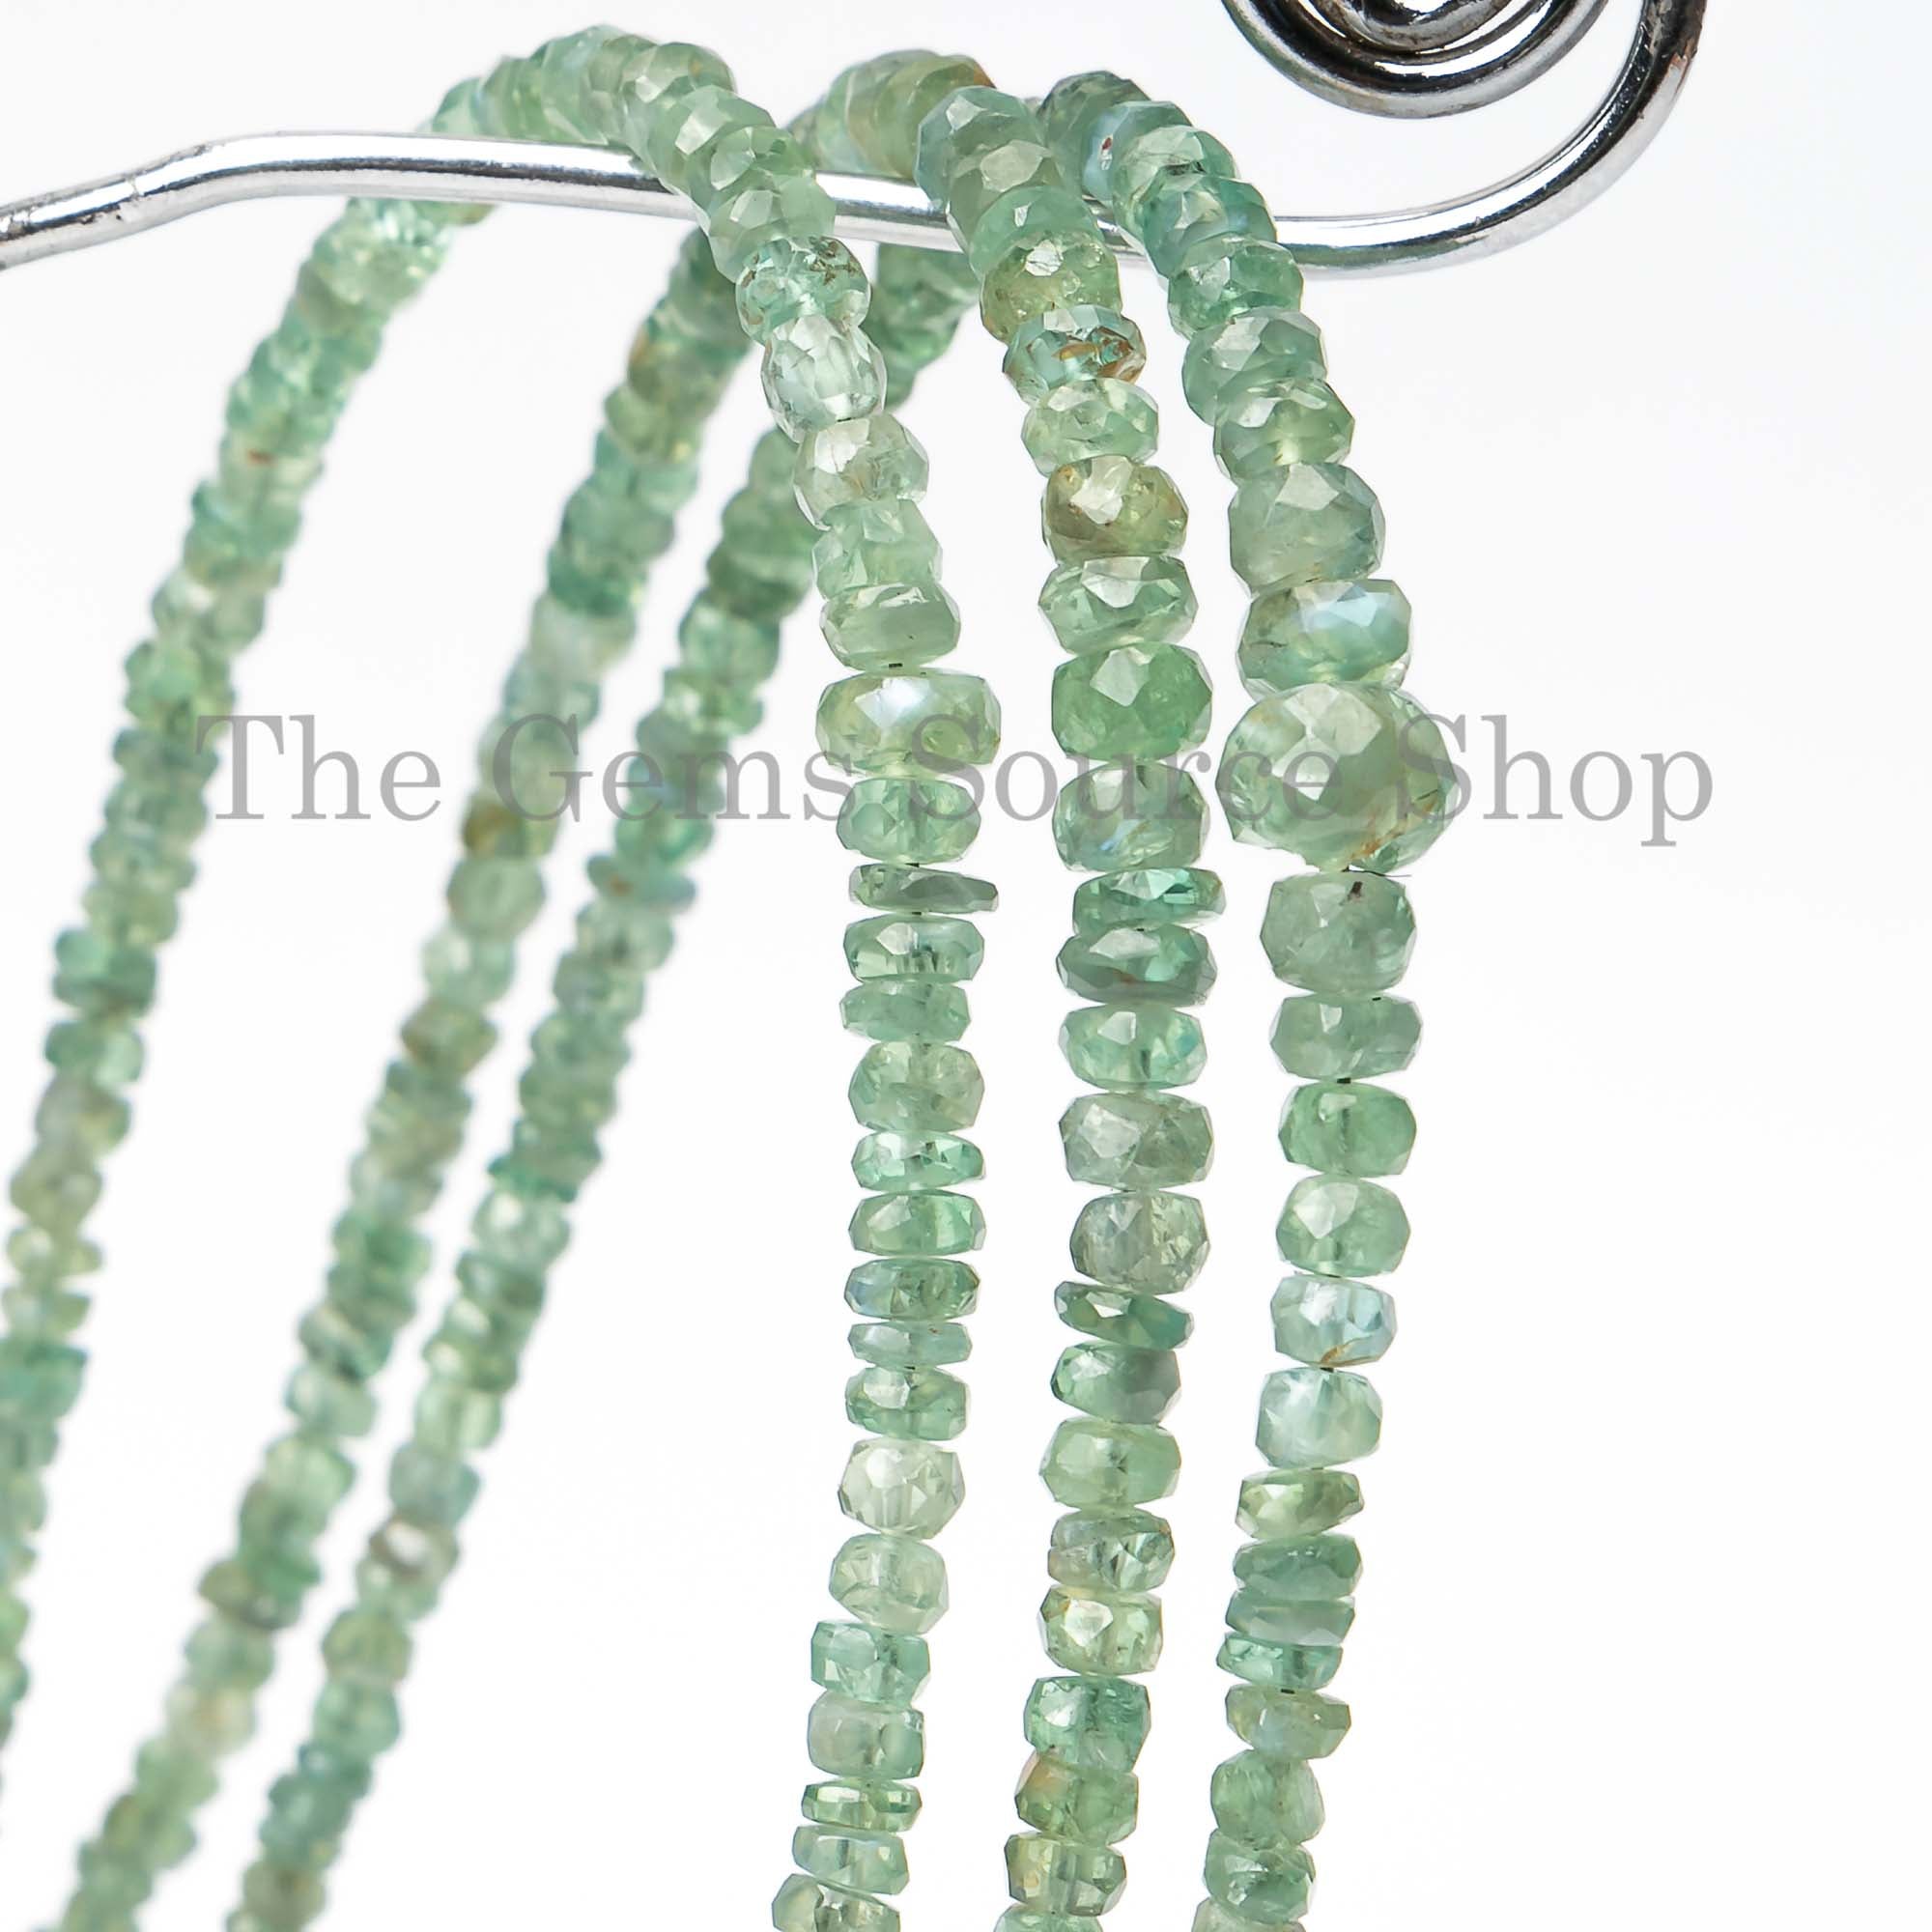 Extremely Alexandrite 2-4mm Faceted Rondelle Beads, AAA Quality Alexandrite Beads, Alexandrite Beads